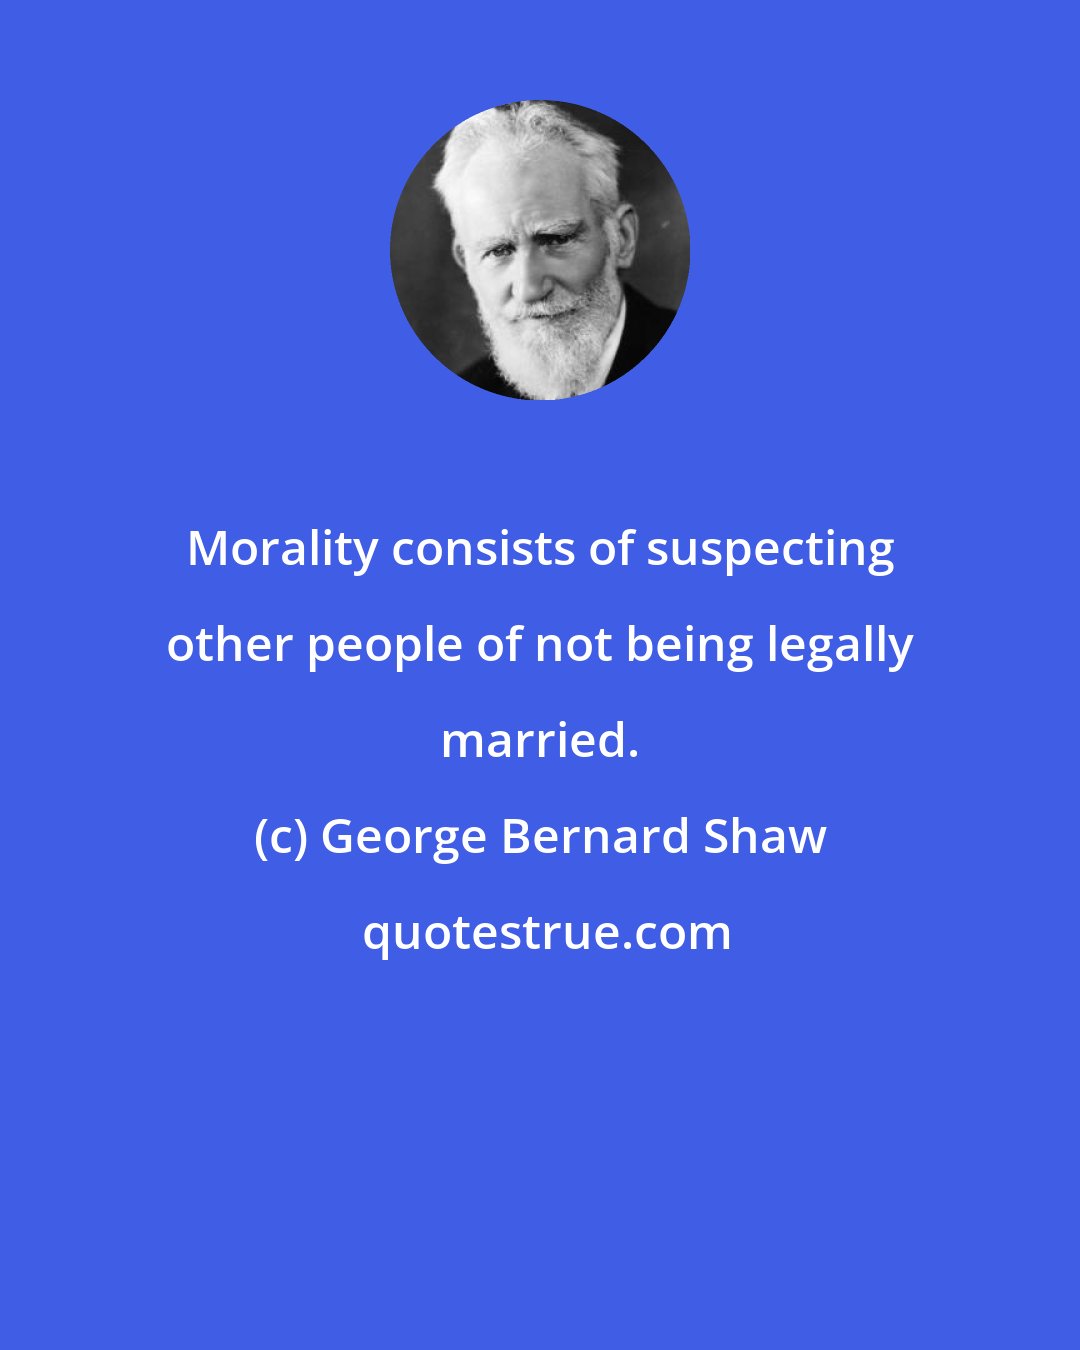 George Bernard Shaw: Morality consists of suspecting other people of not being legally married.